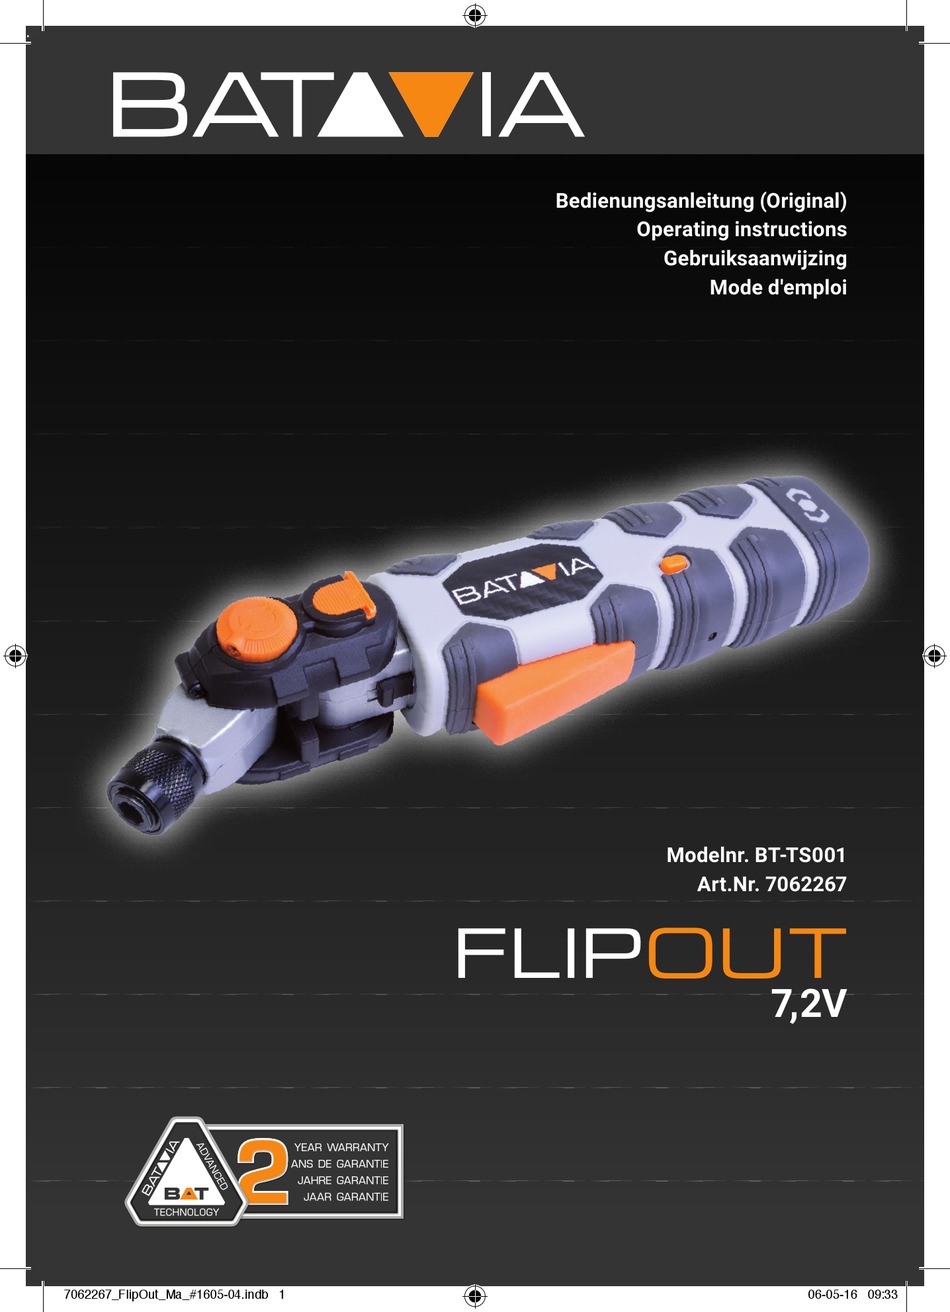 download flipout safety video